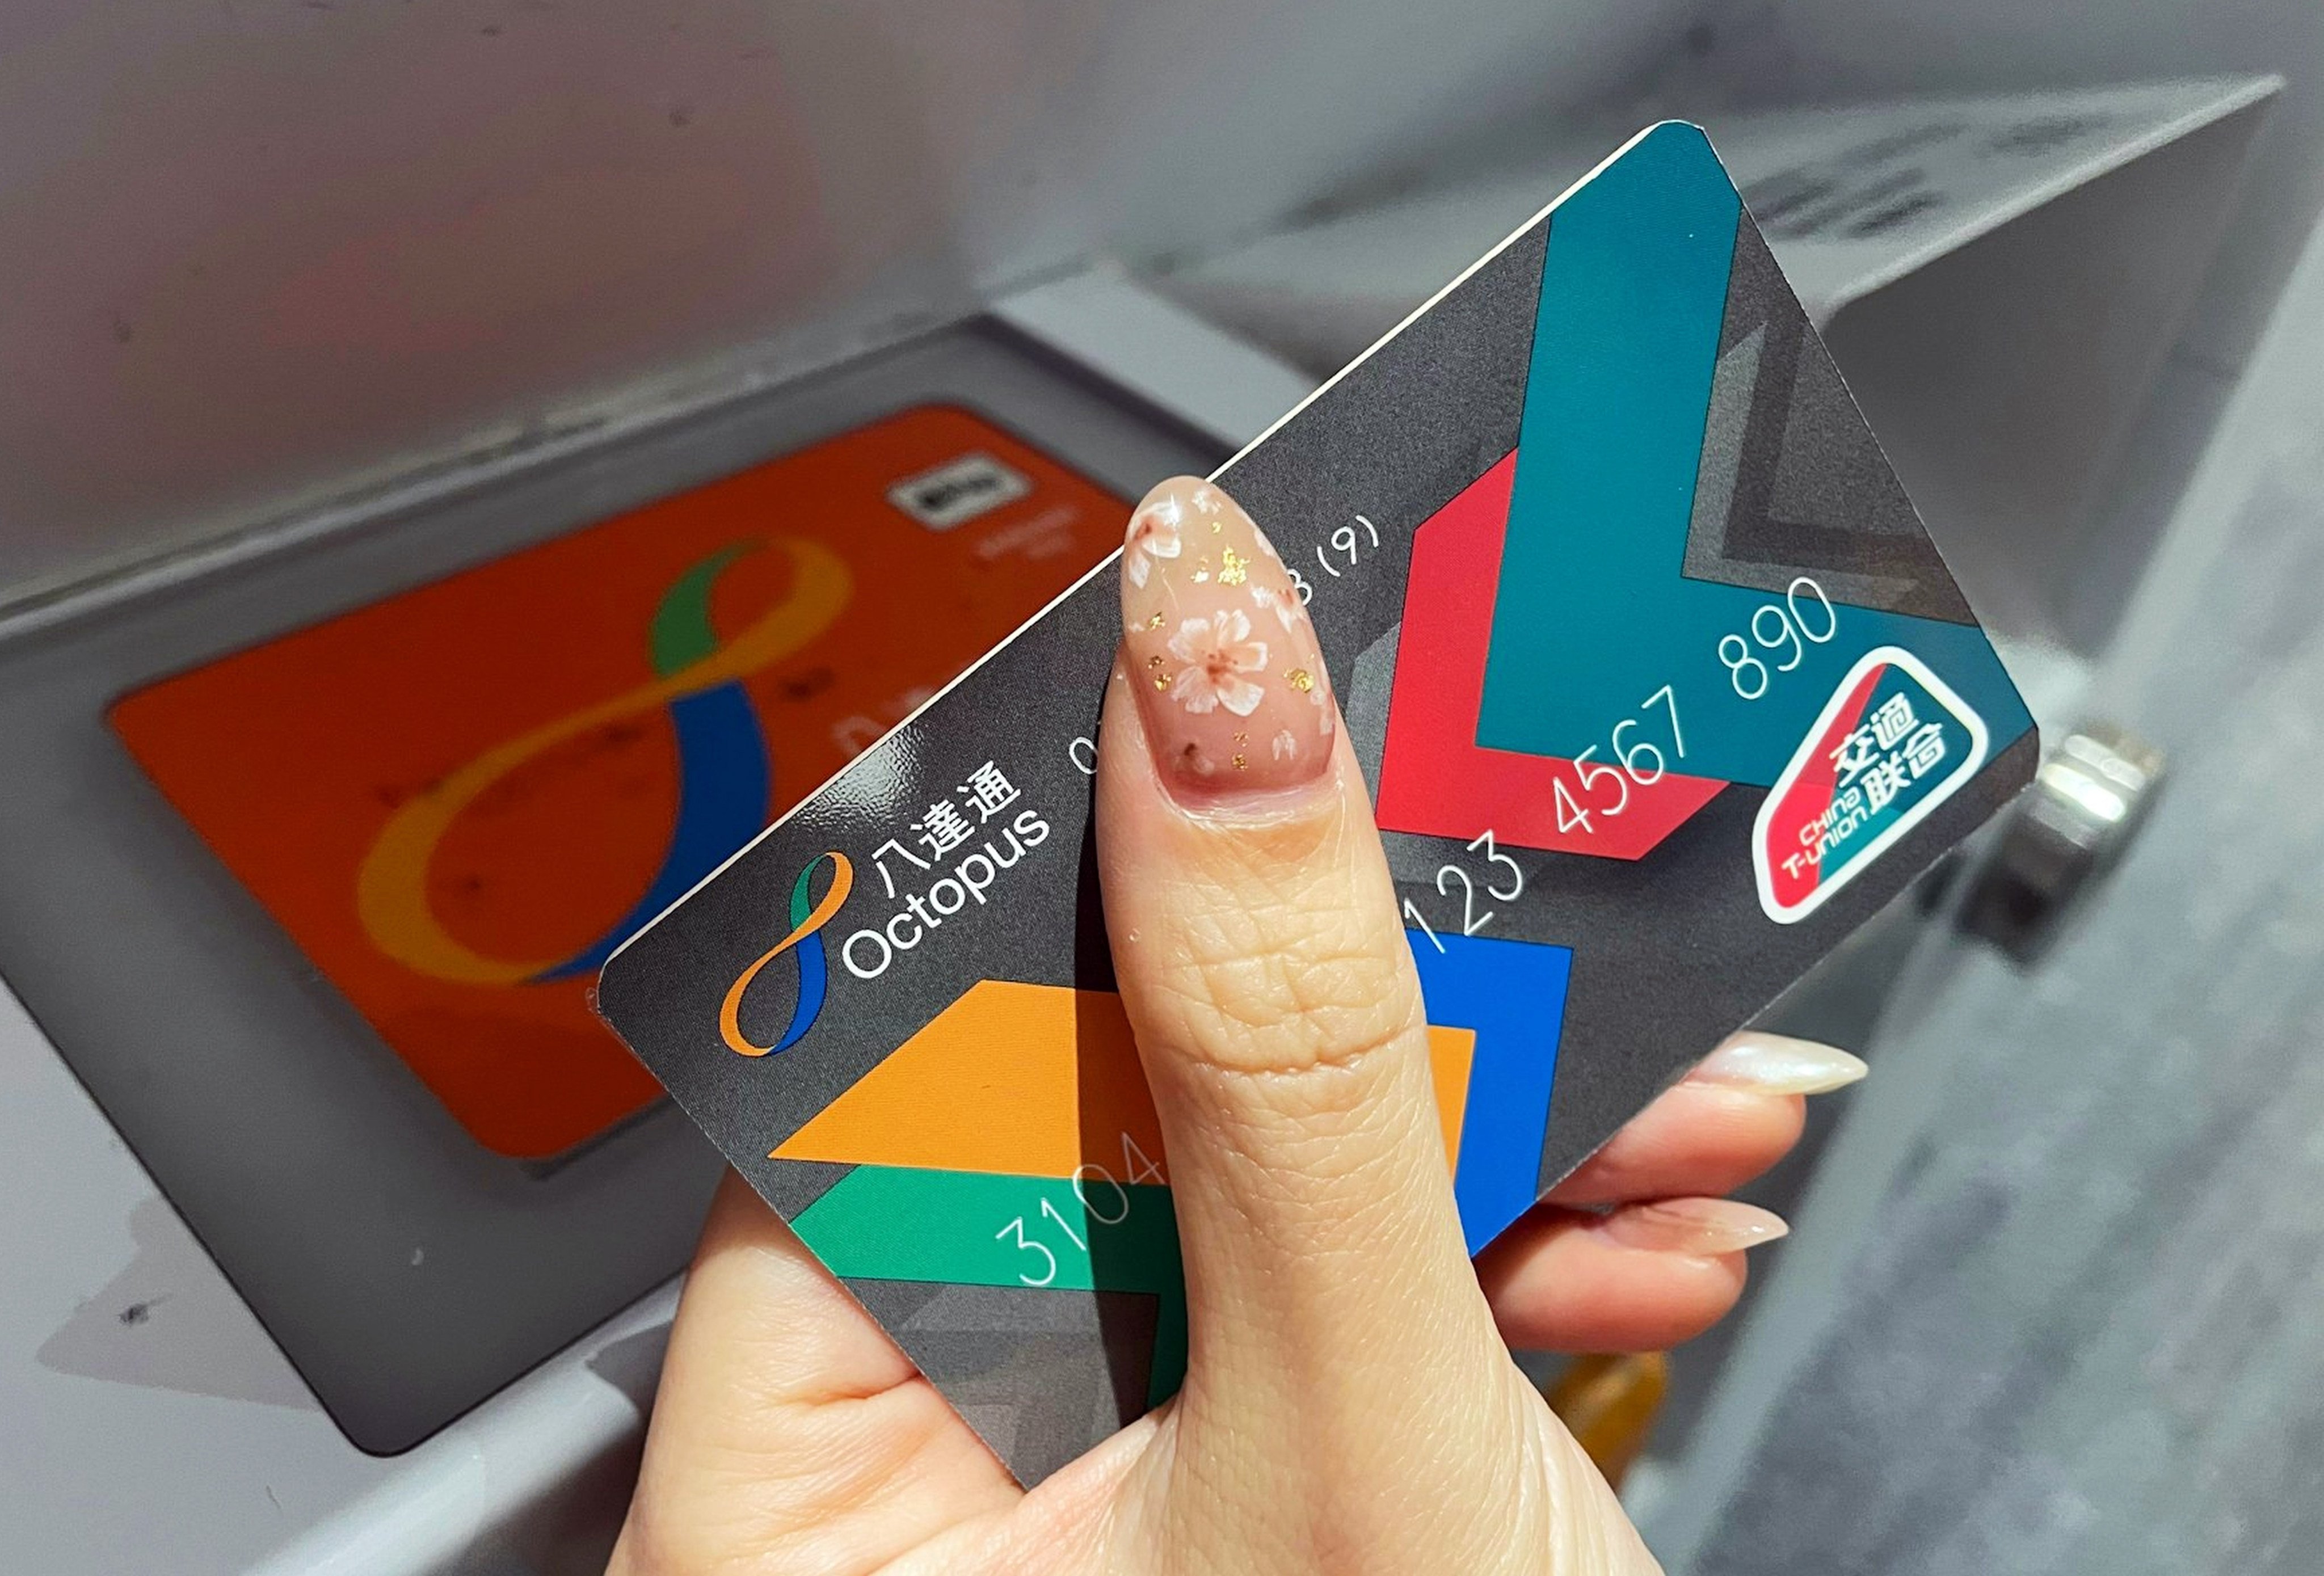 Holders of the new card can tap for rides on public transport bearing the “China T-Union” logos. This comes up to 38,000 public bus routes and 285 rail or ferry services in mainland China. Photo: Handout